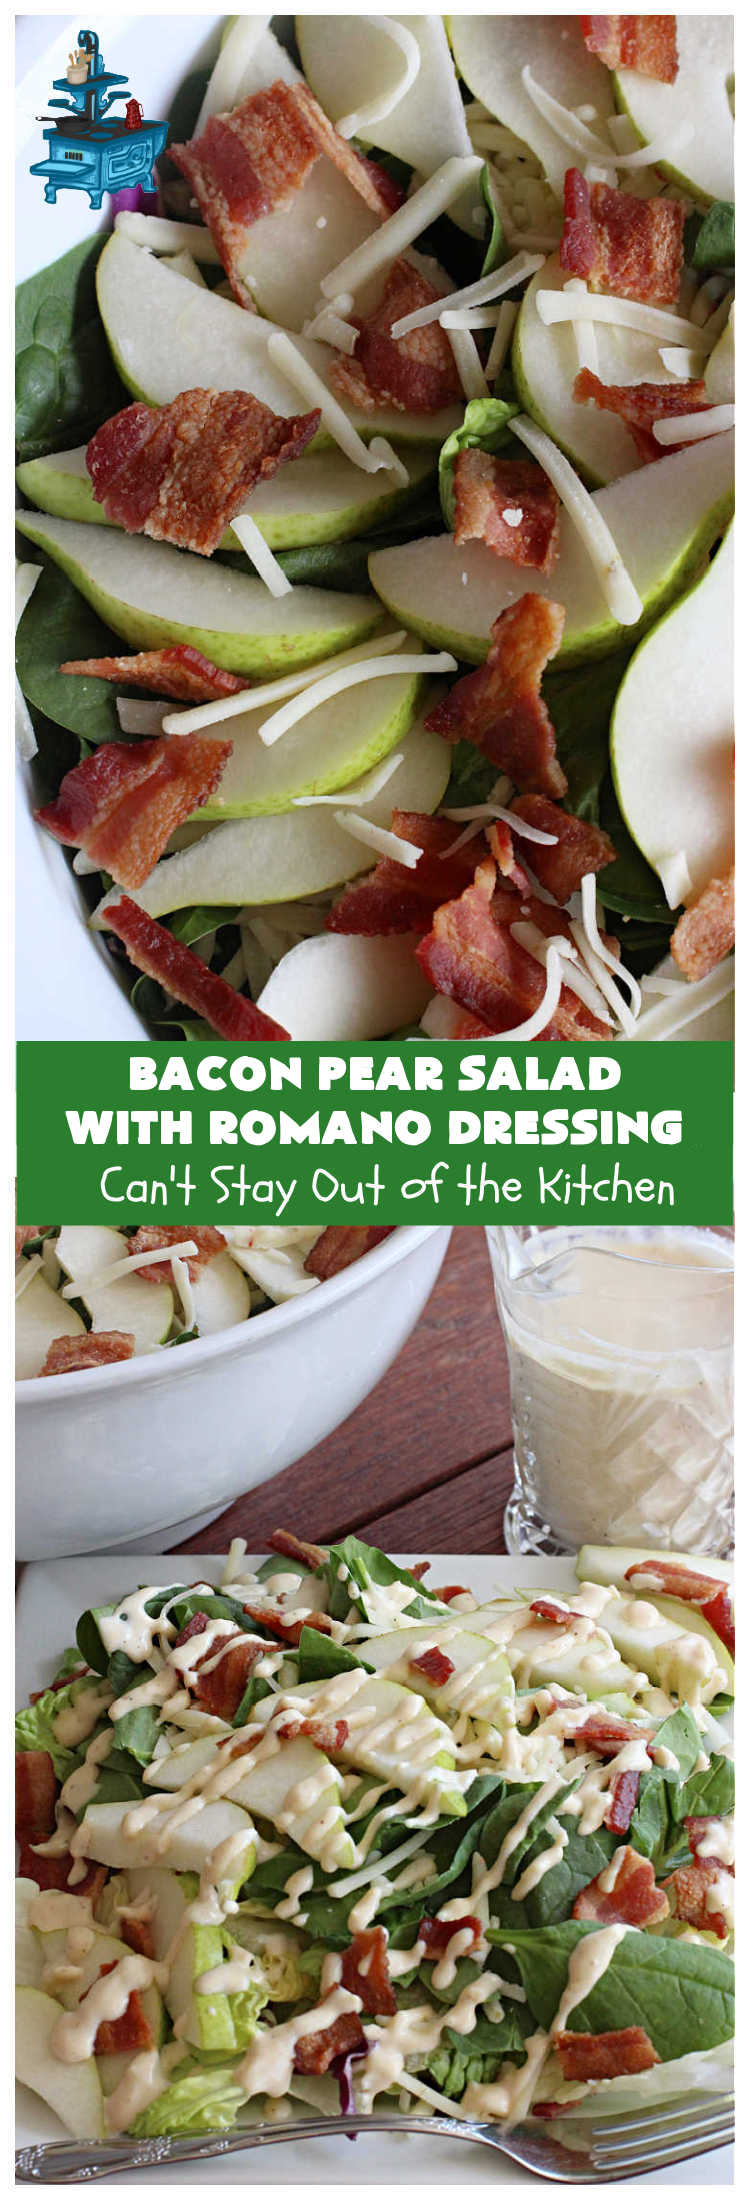 Bacon Pear Salad with Romano Dressing | Can't Stay Out of the Kitchen - this elegant & delicious #salad includes fresh #pears, #bacon & #PepperJackCheese. The #SaladDressing includes #HoneyMustard along with #RomanoCheese. This is a terrific #SideDish for company or #holiday dinners as regular family dinners. One bite and you'll want so much more! #GlutenFree #BaconPearSaladWithRomanoDressing